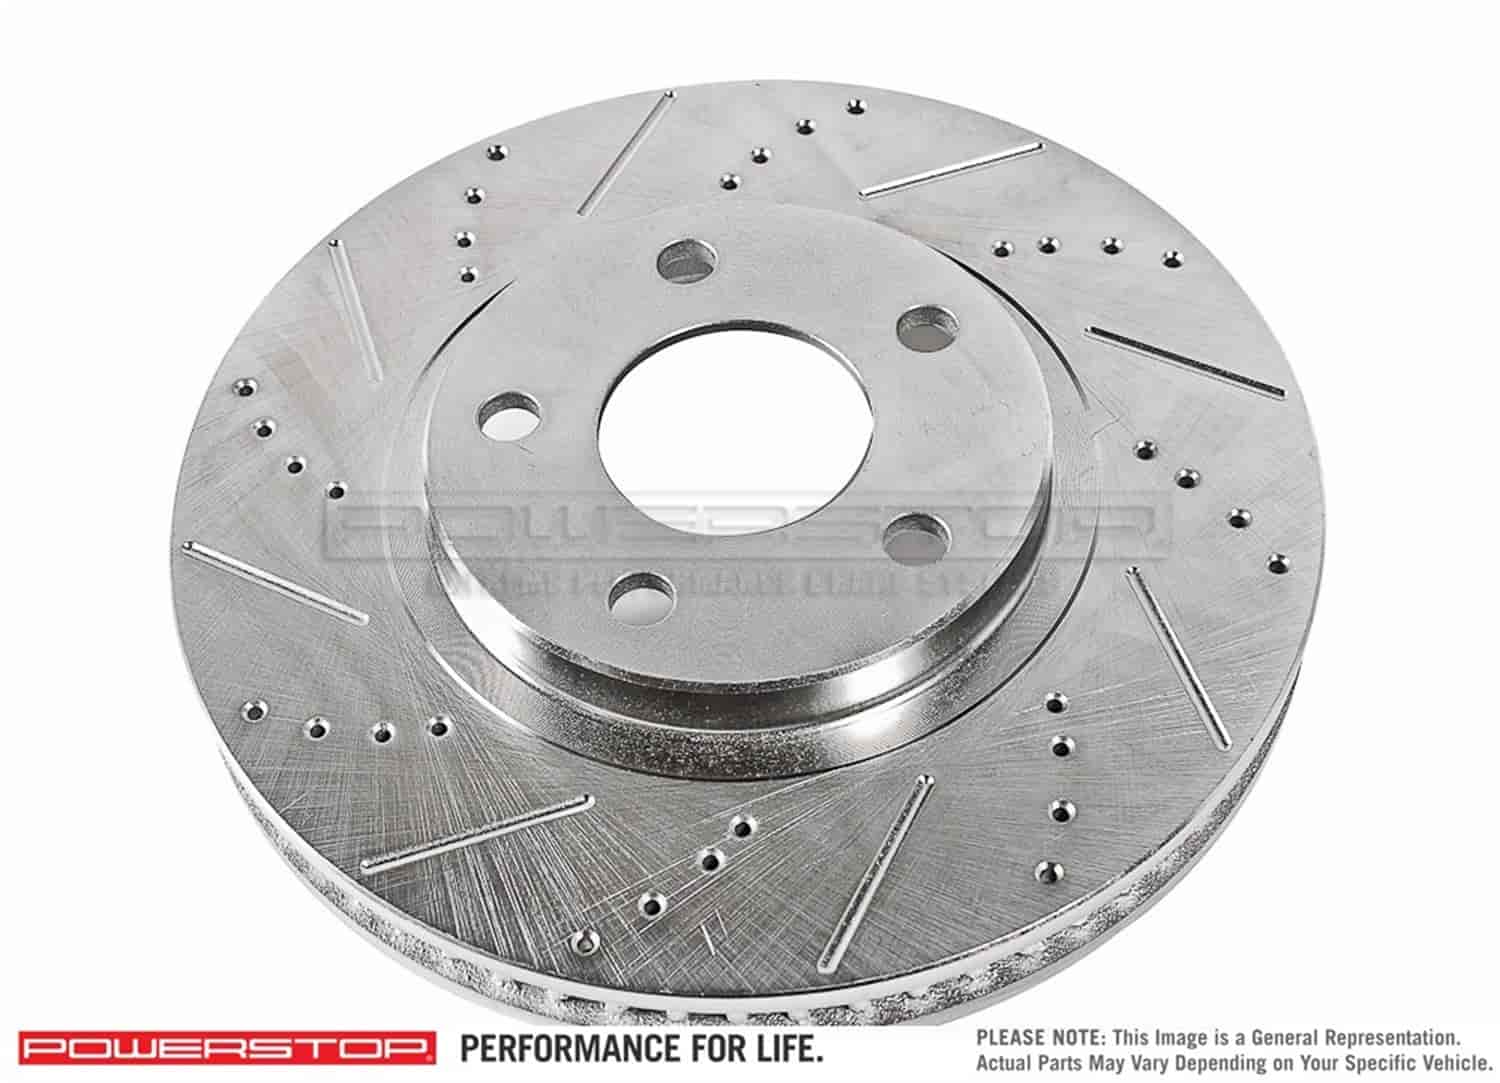 Drilled and Slotted Front Brake Rotor Fits Select 1999-2020 Cadillac, Chevy, GMC, Hummer Models [Left/Driver Side]